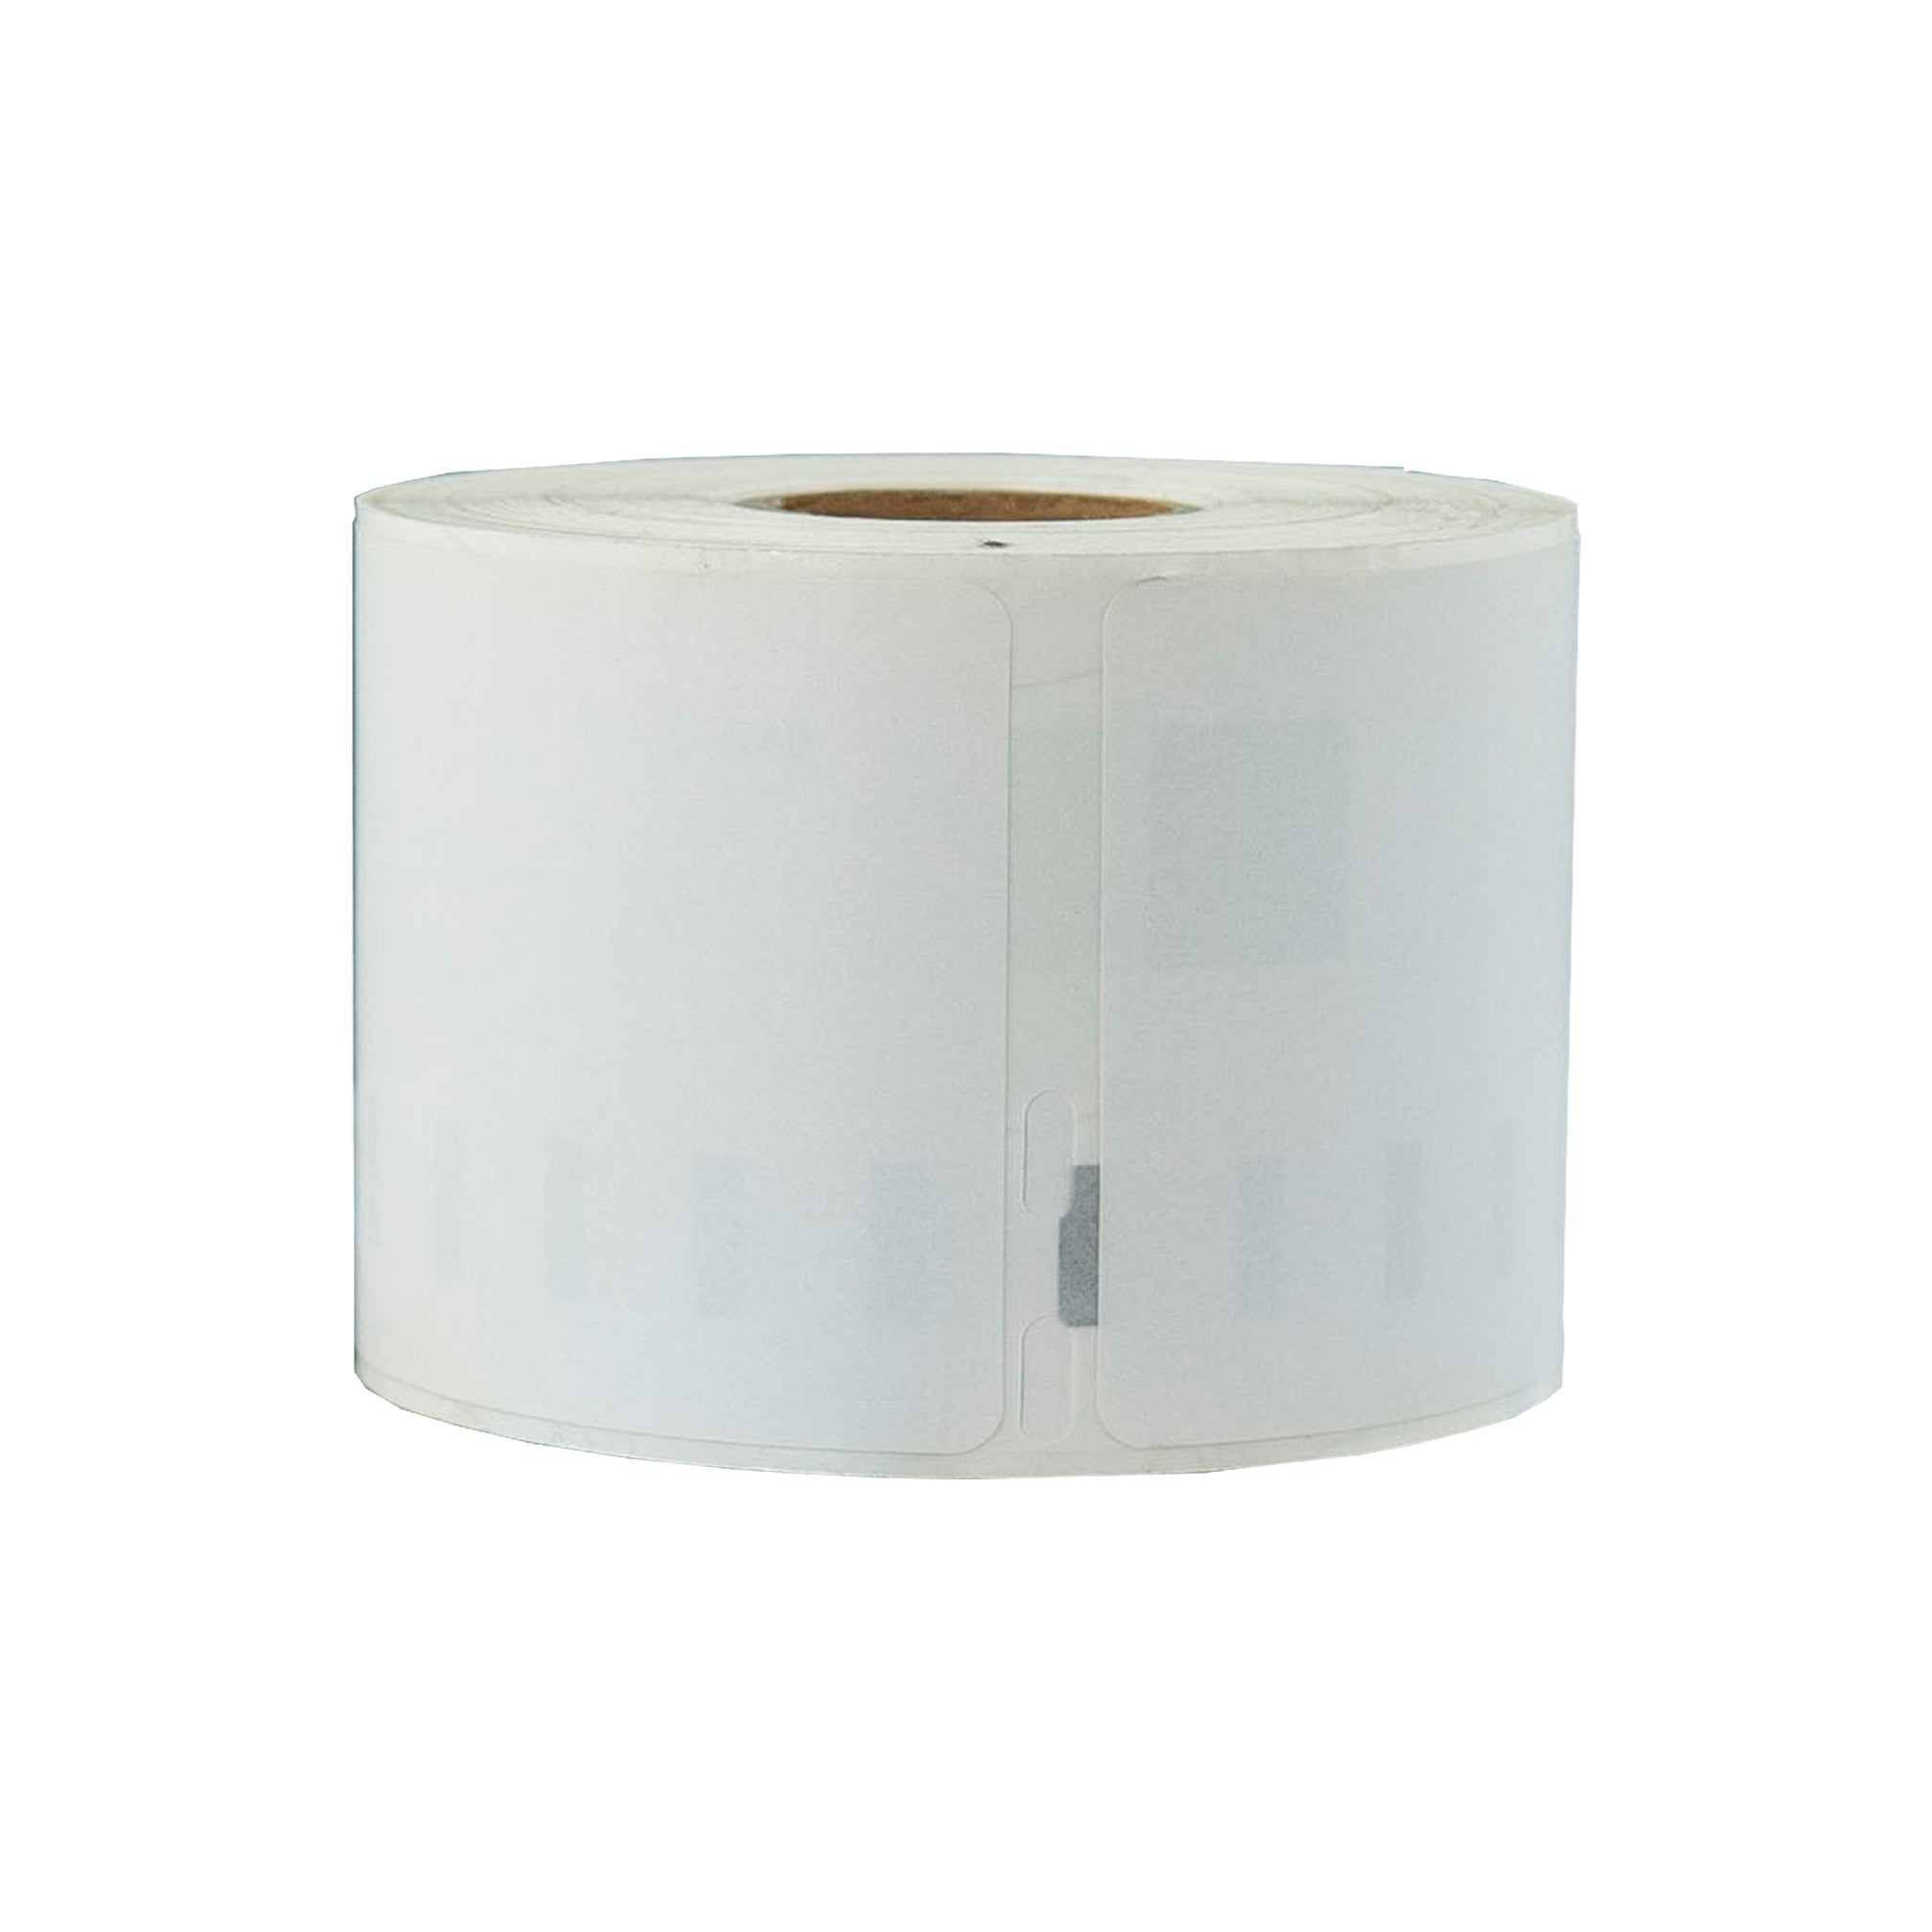 50mm x 100mm Direct Thermal Permanent Label, 500 Labels Per Roll, 40mm Core, Perforated